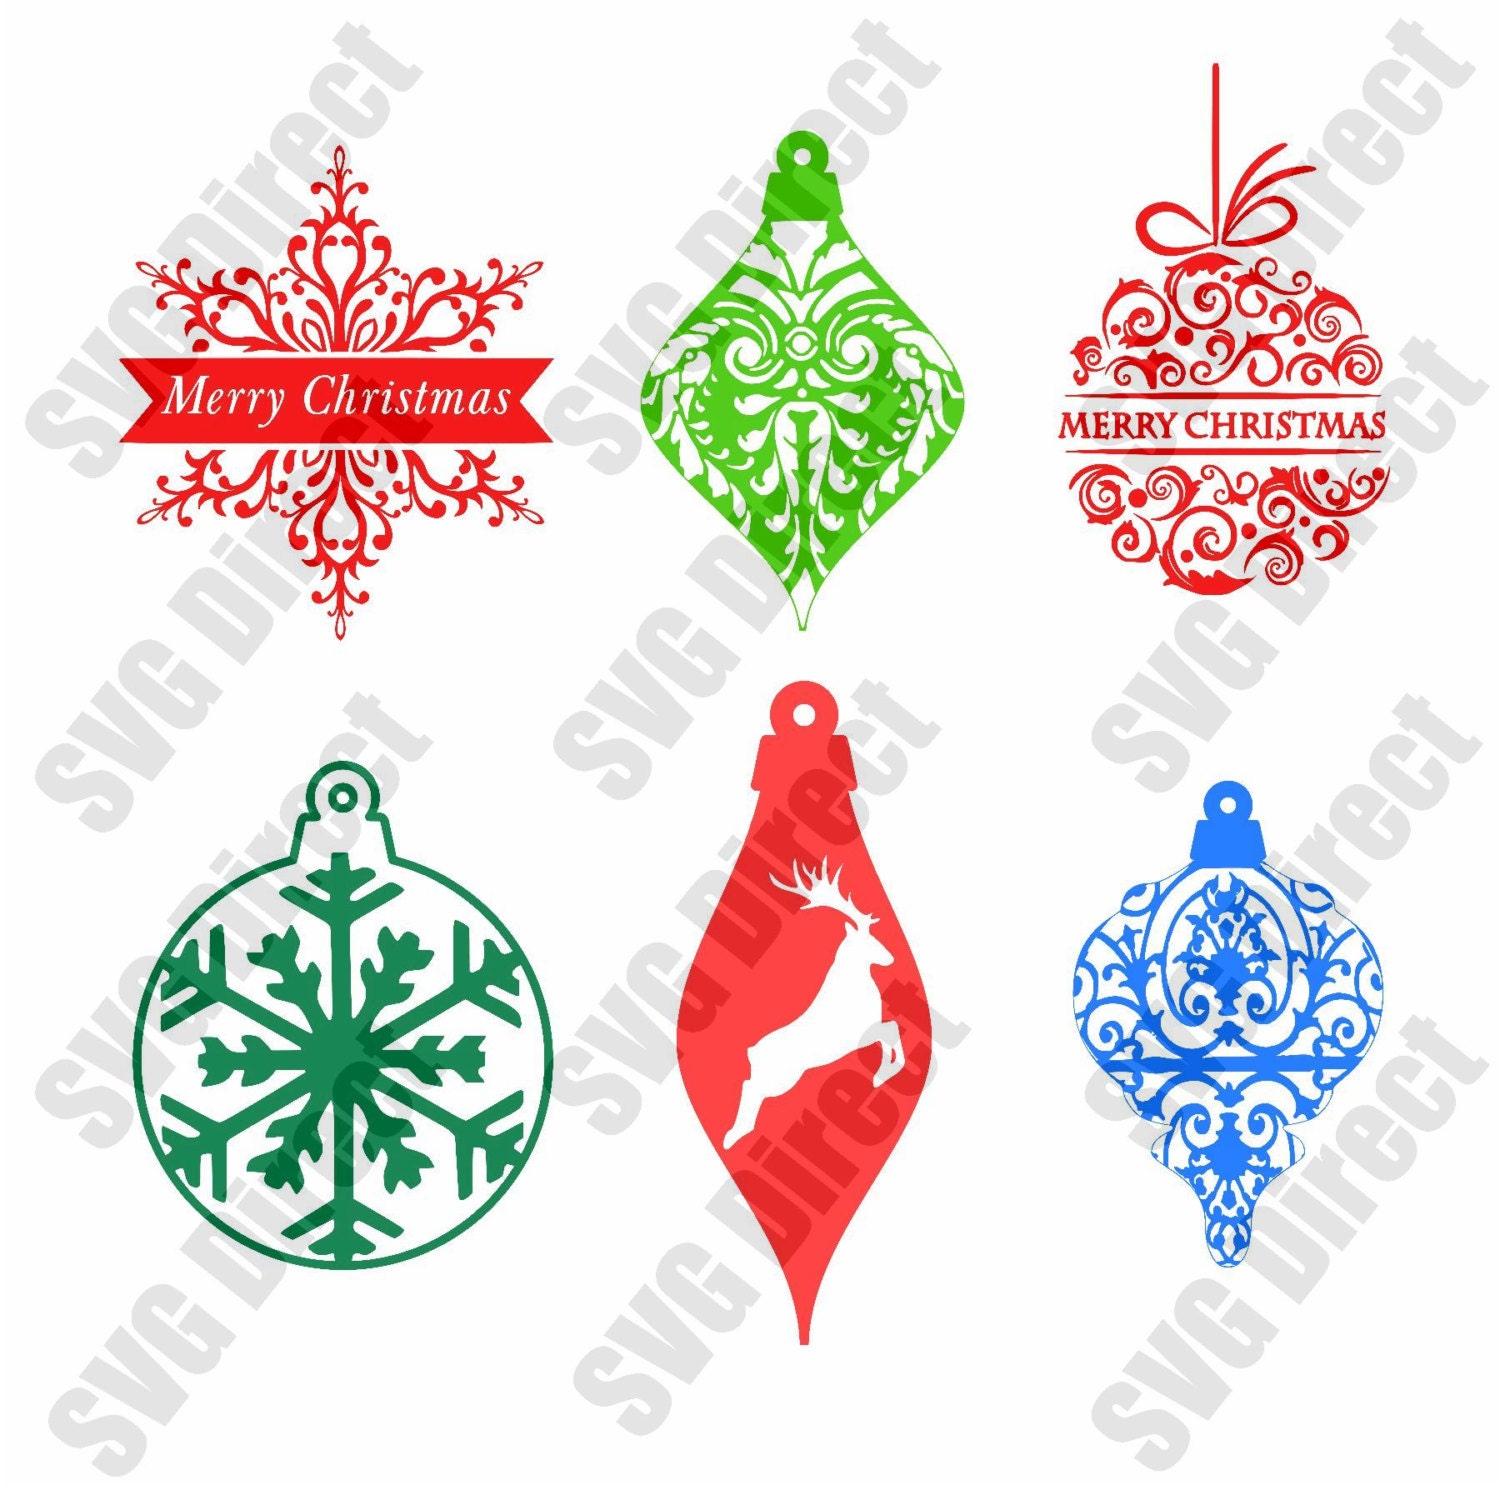 6 designs total of Ornate Christmas Ornaments SVG cut file ...